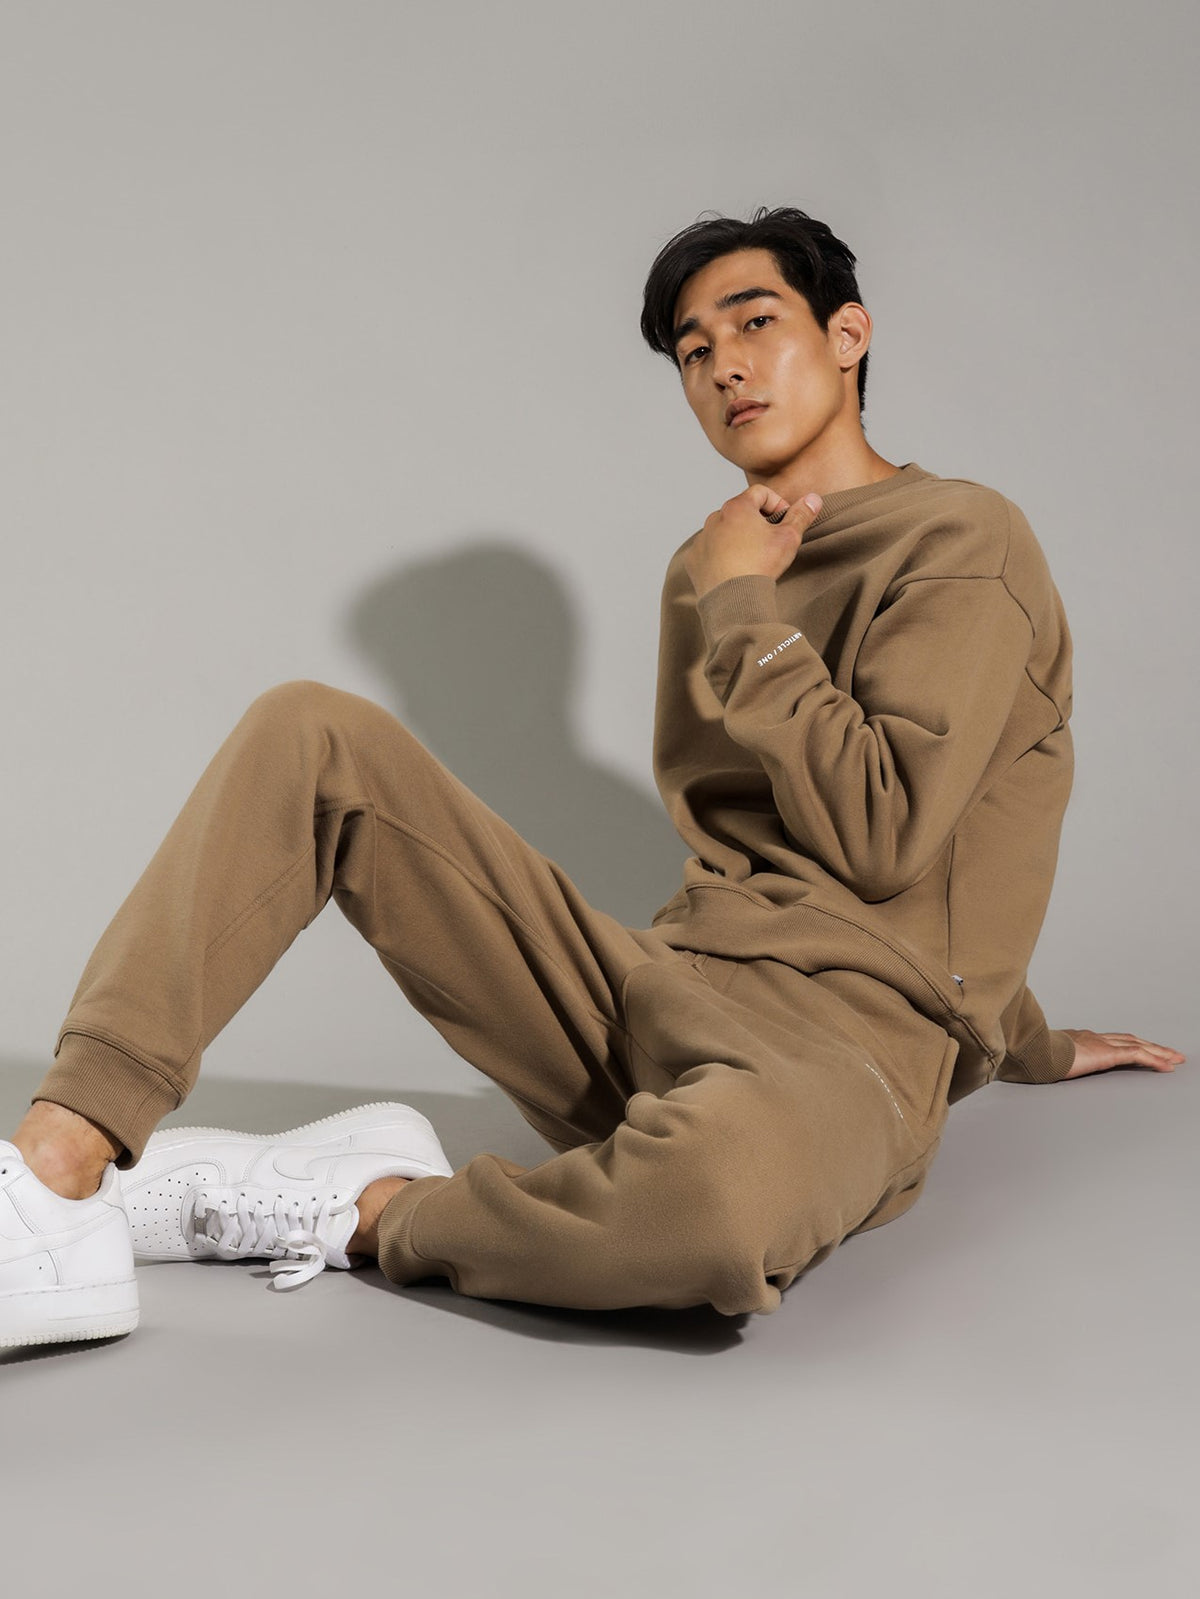 Classic Track Pants in Latte